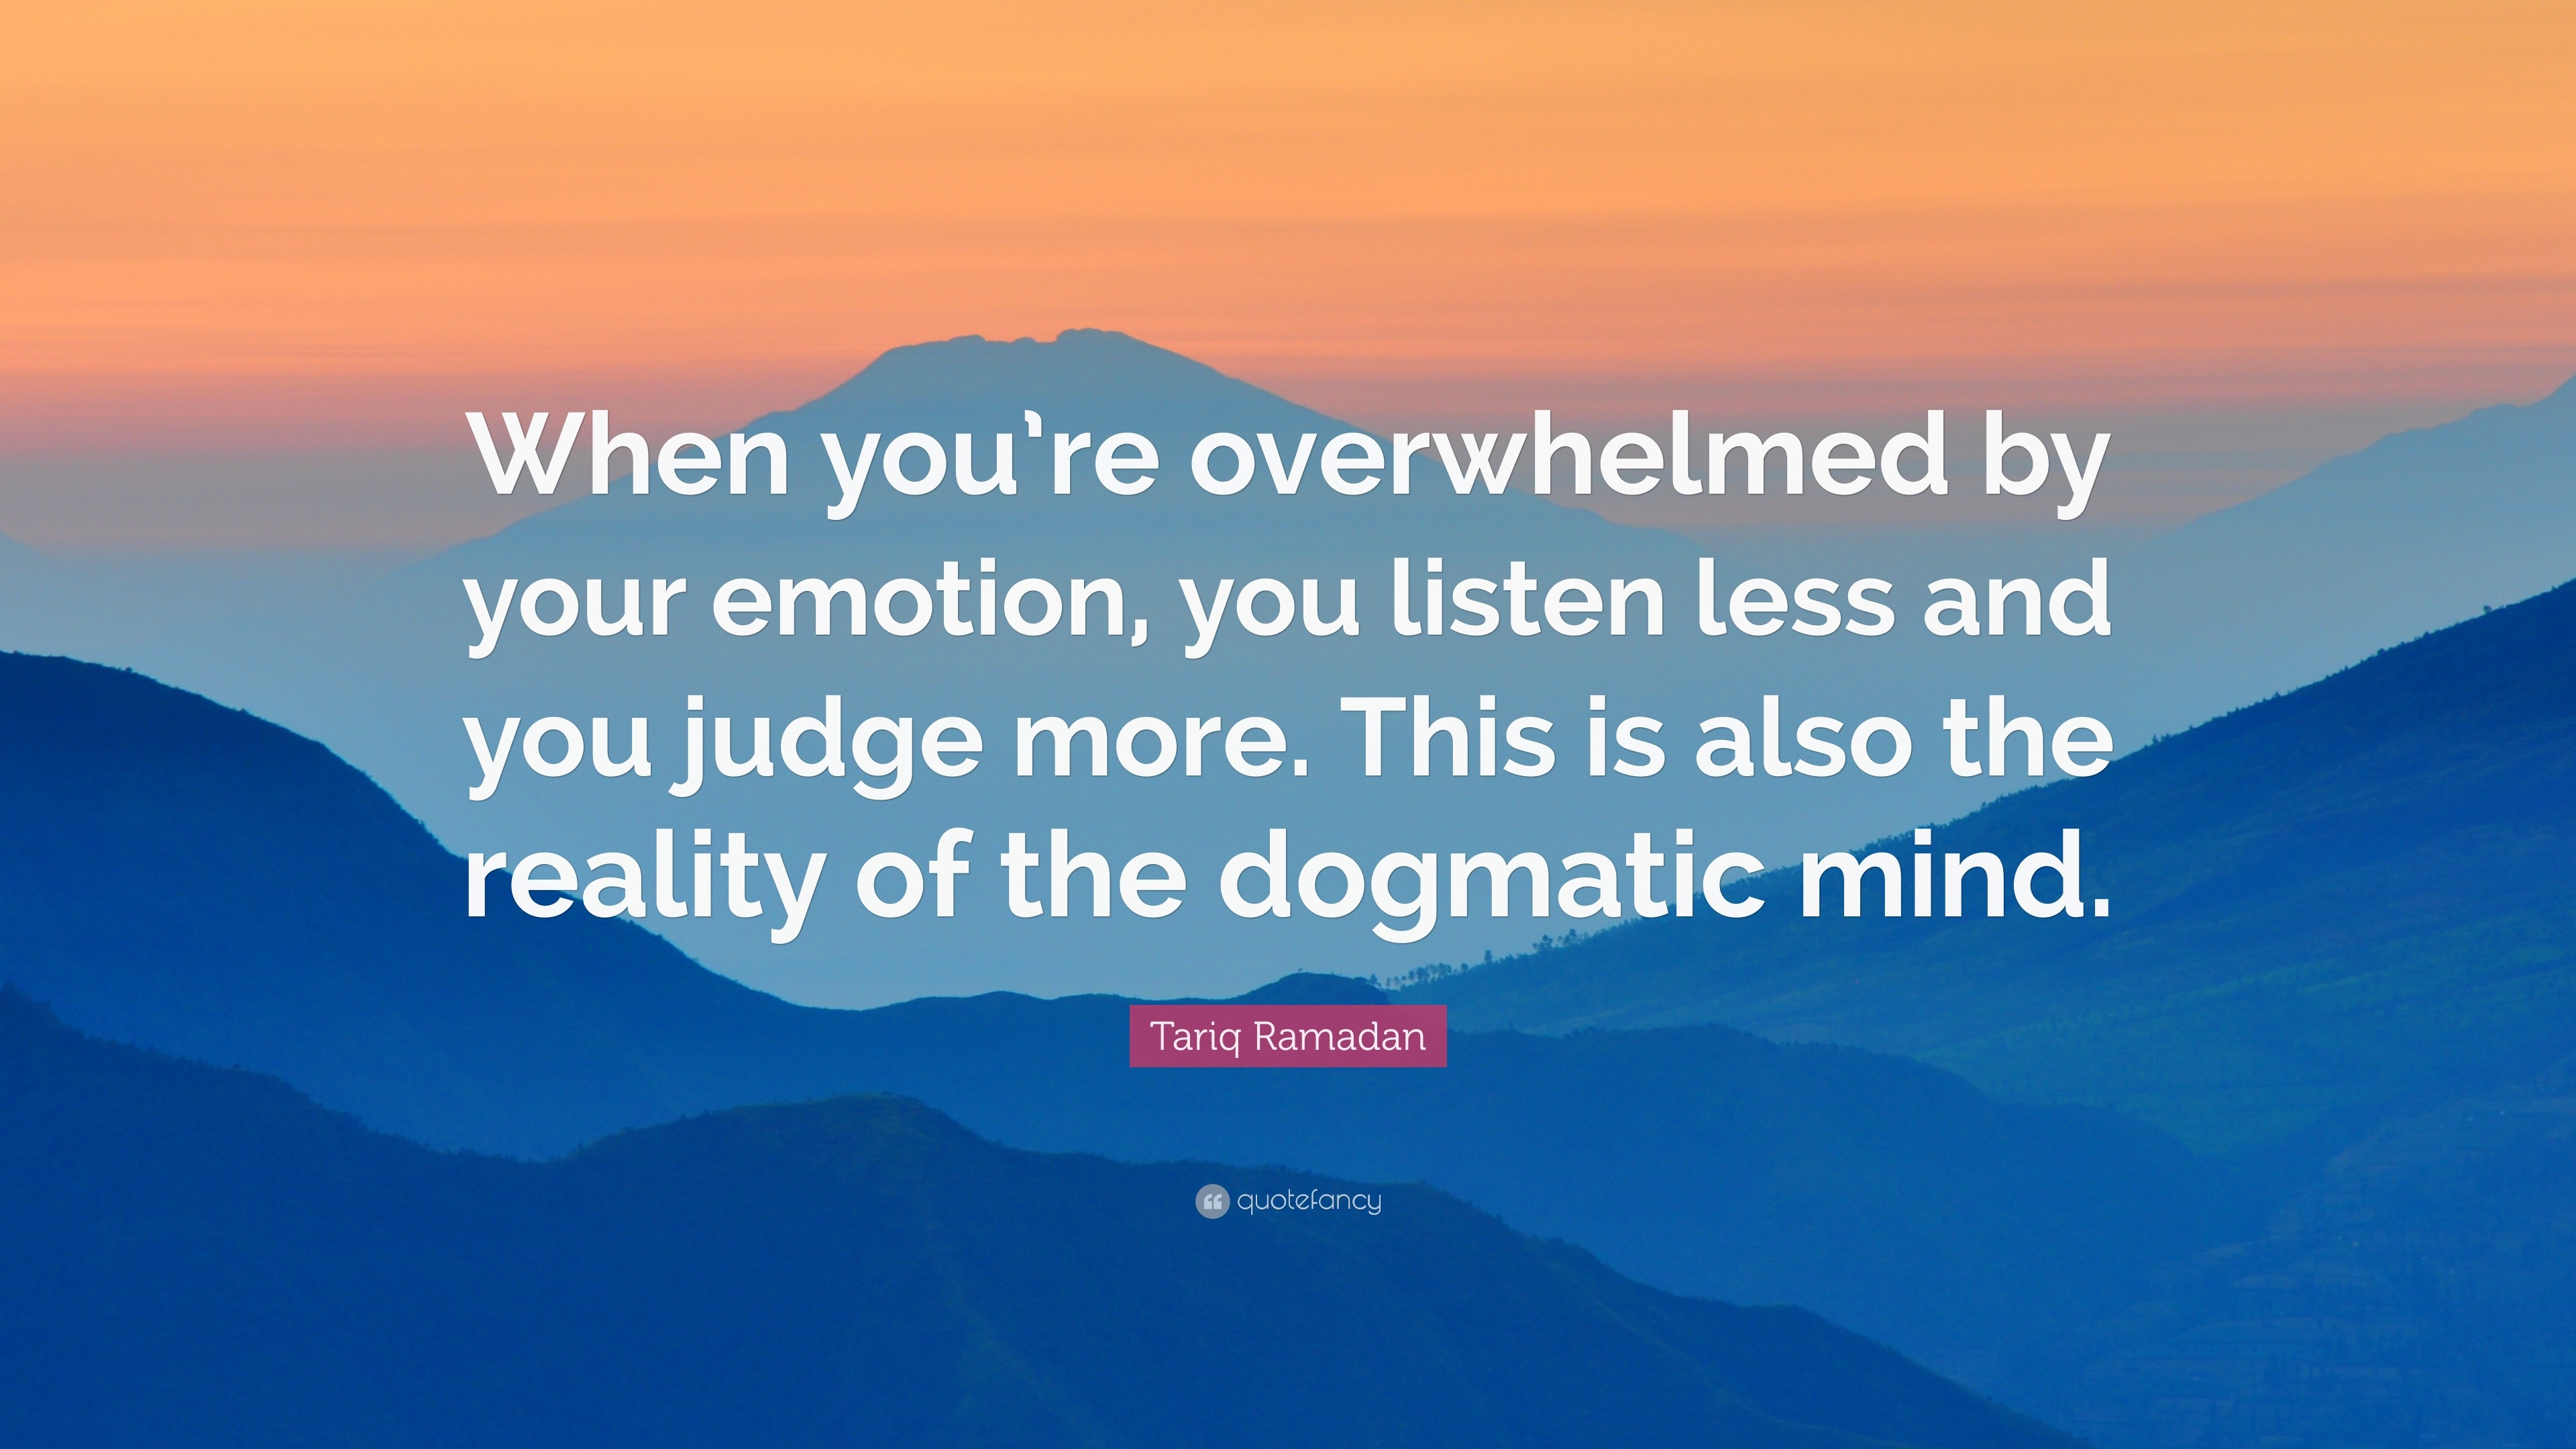 Tariq Ramadan Quote: “When you’re overwhelmed by your emotion, you ...